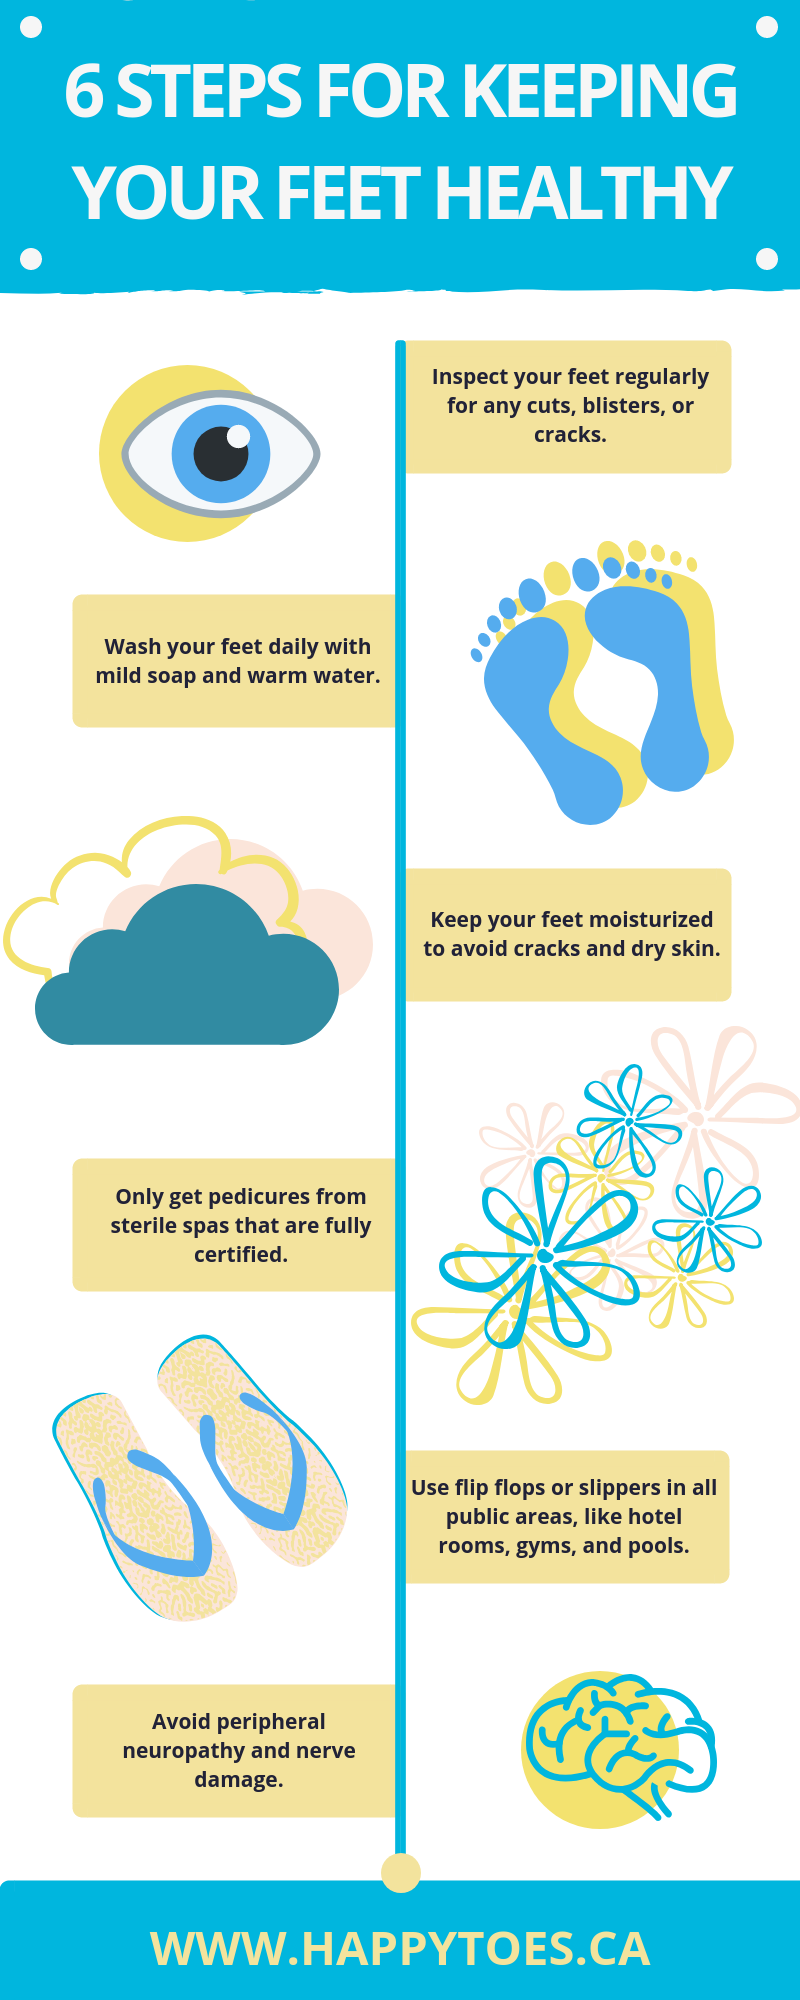 6 steps for keeping your feet healthy